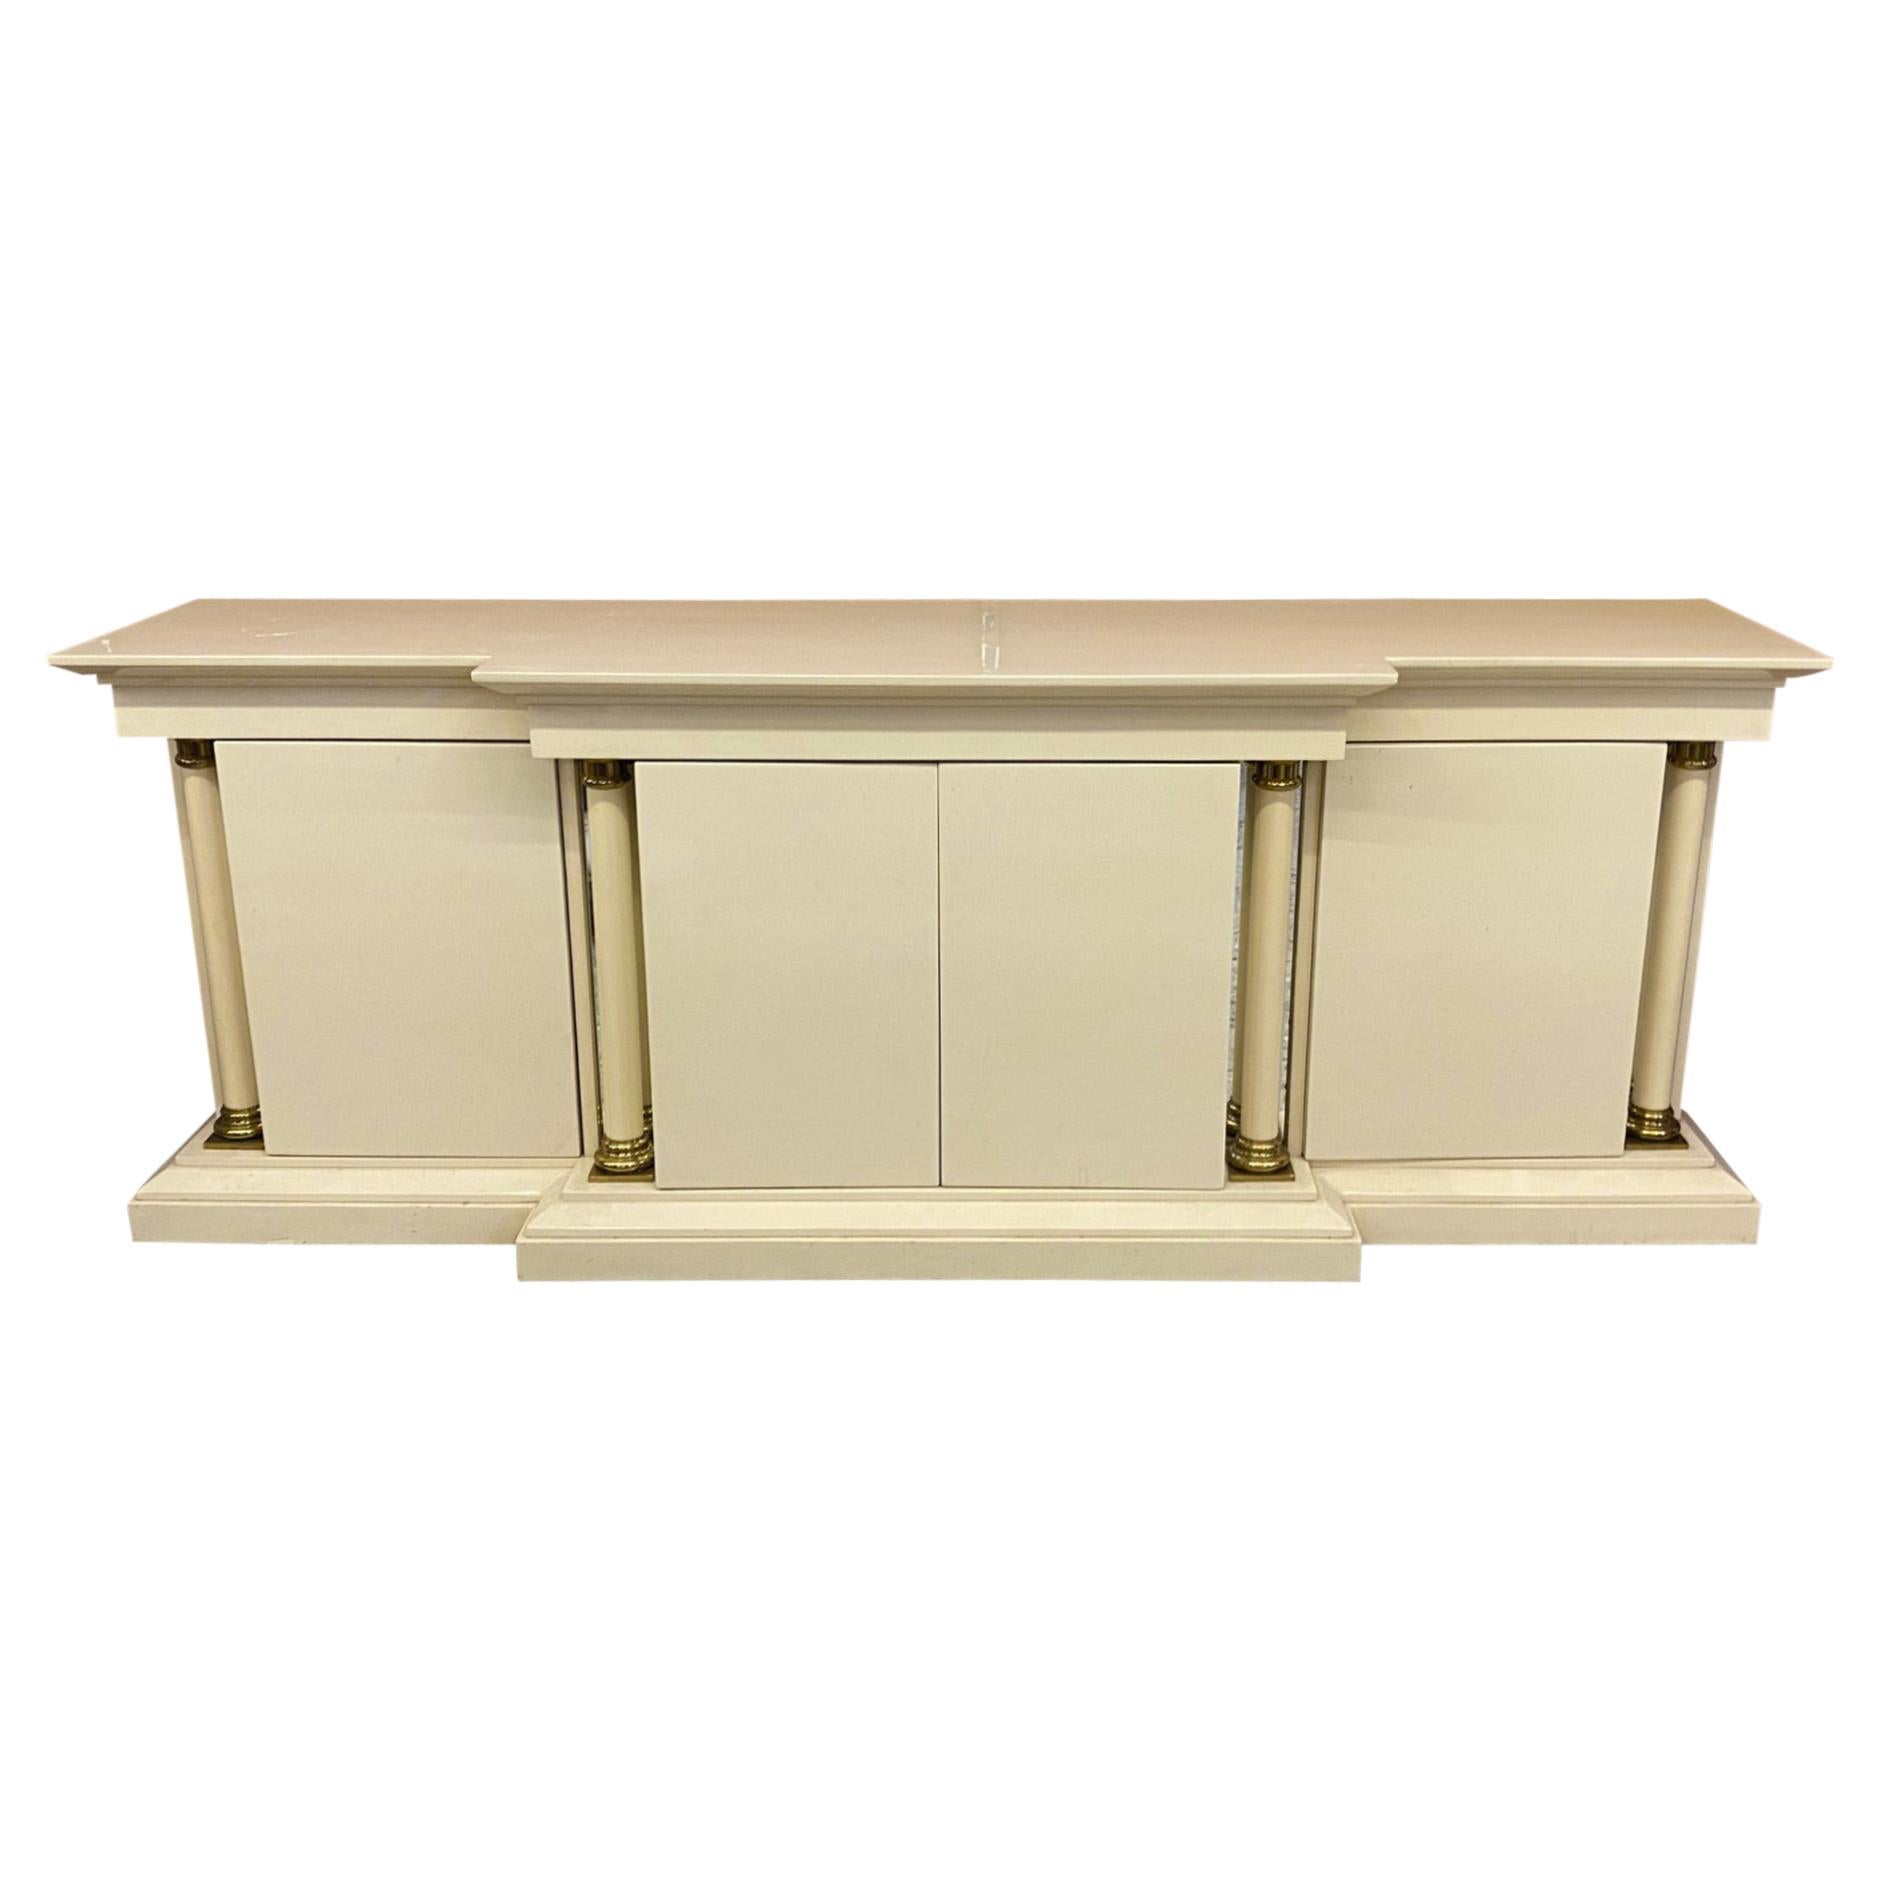 Maison Jean Charles, Neoclassic Buffet in Lacquered Wood and Brass, circa 1970